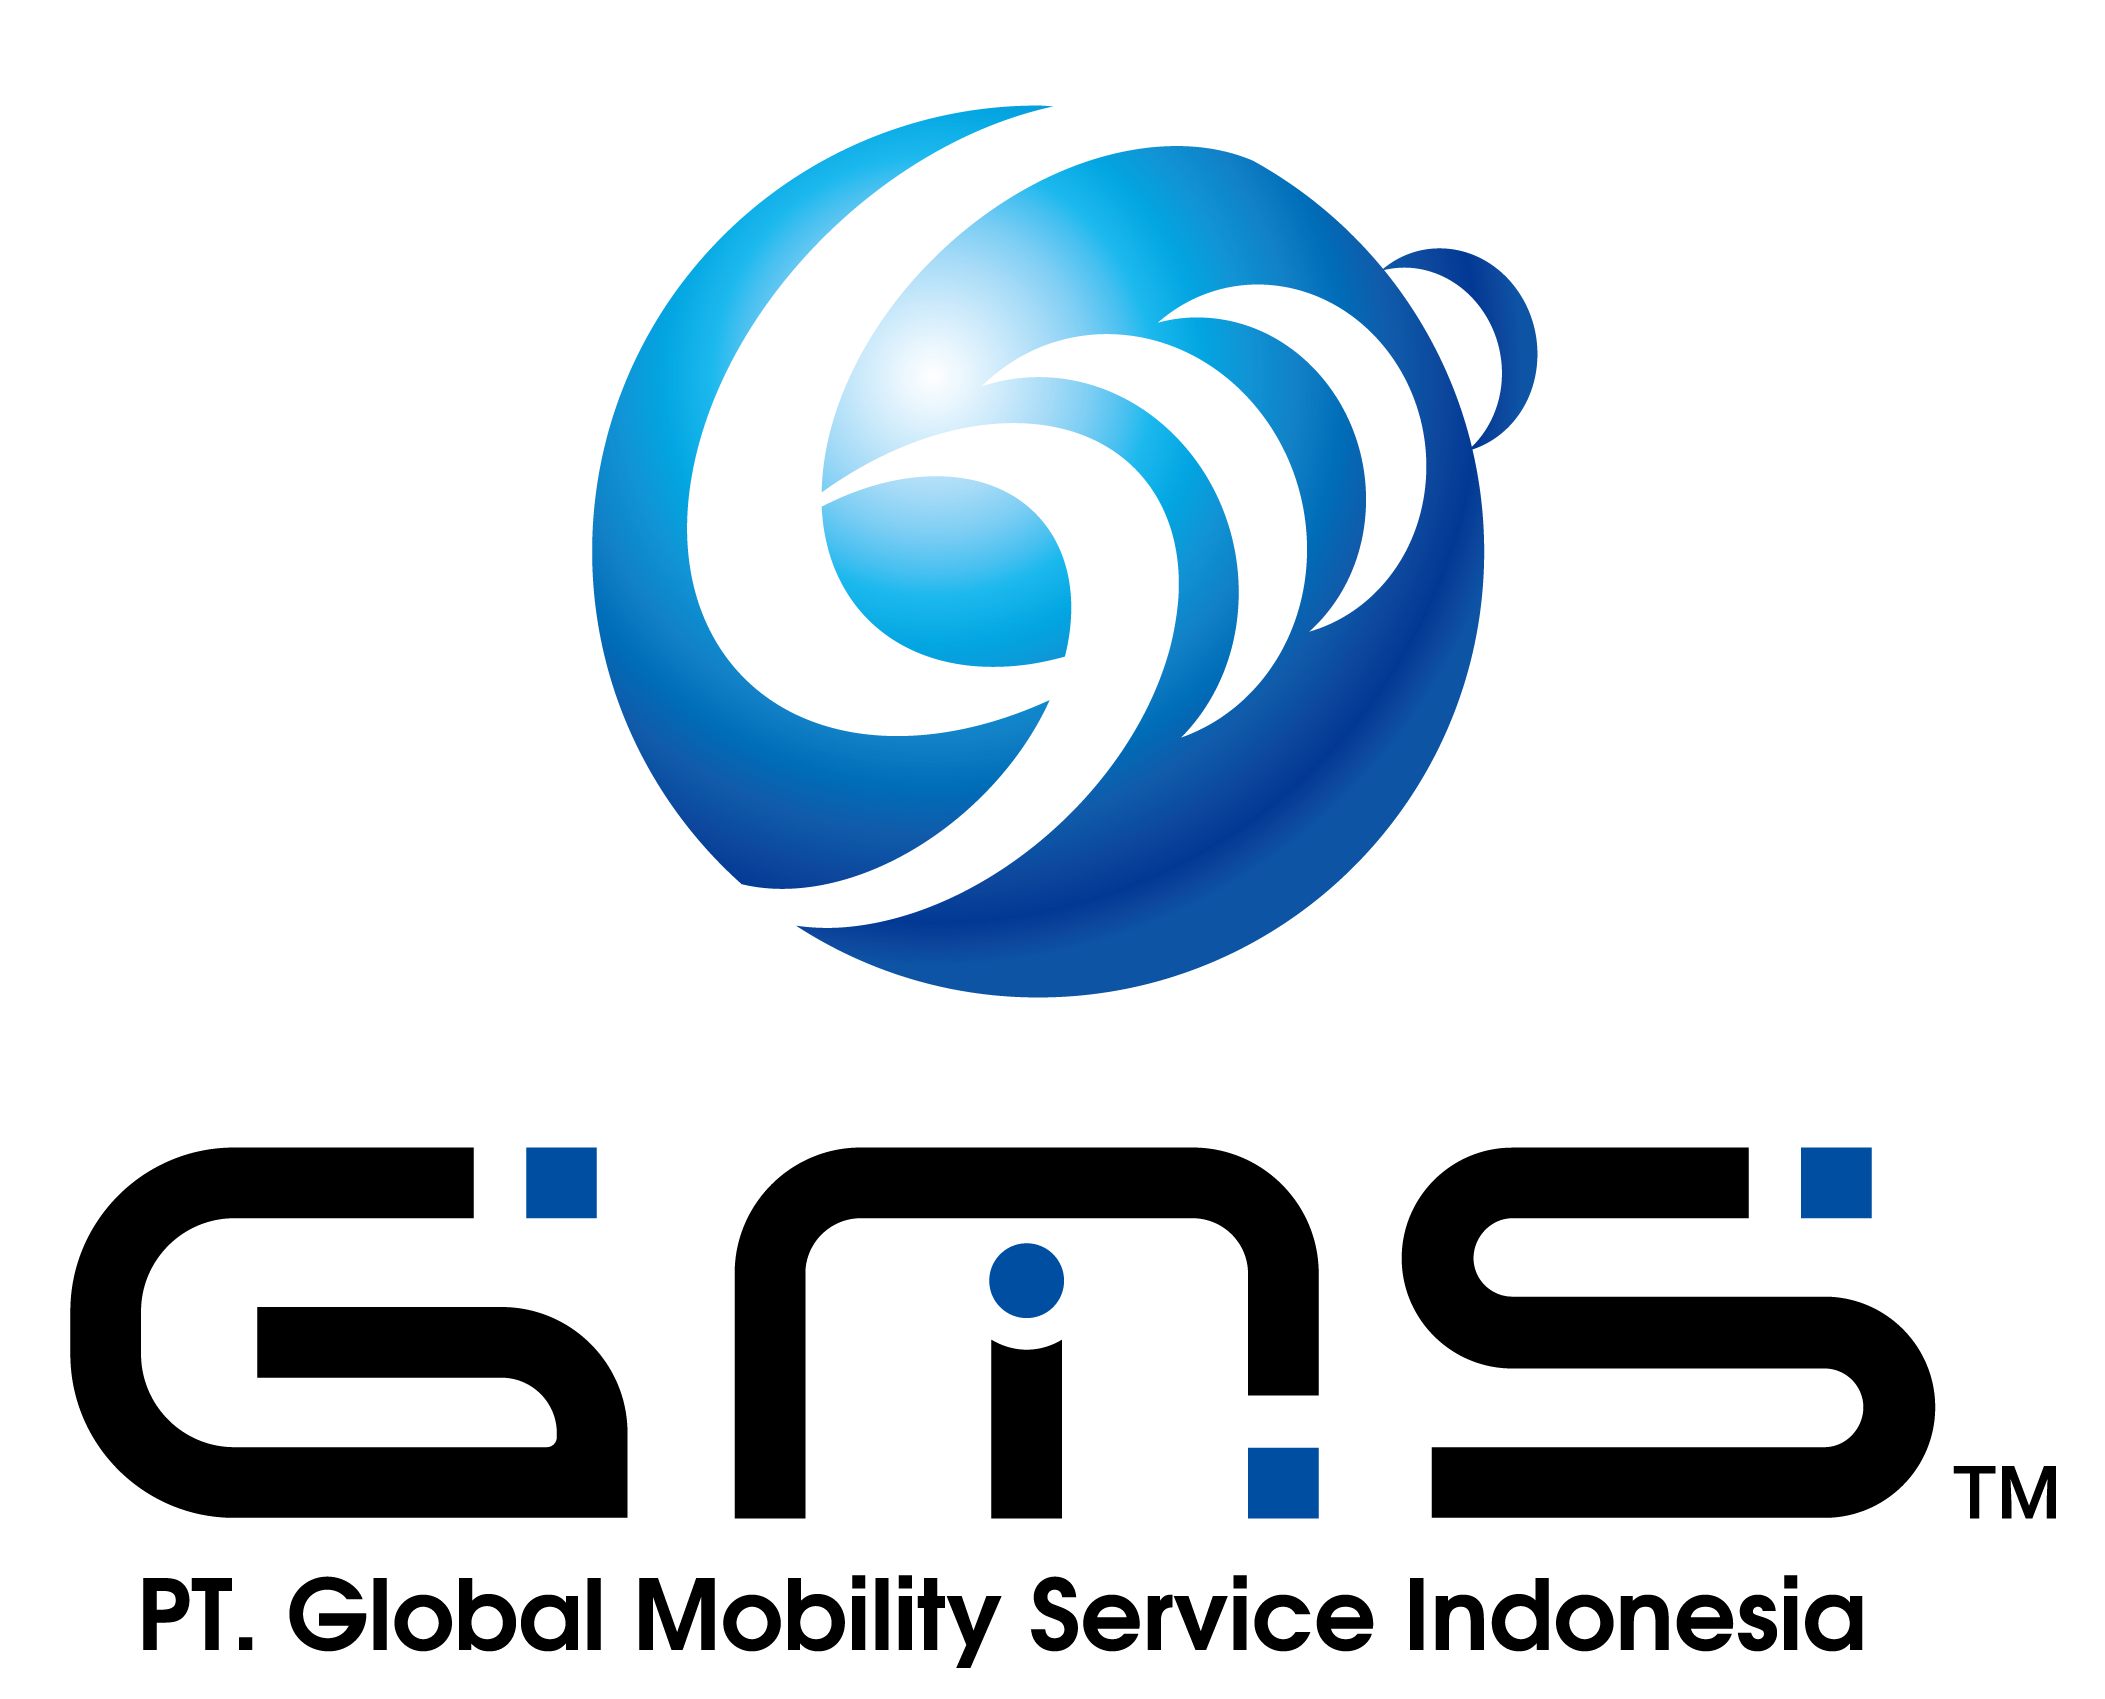 Pt. Global Mobility Service Indonesia